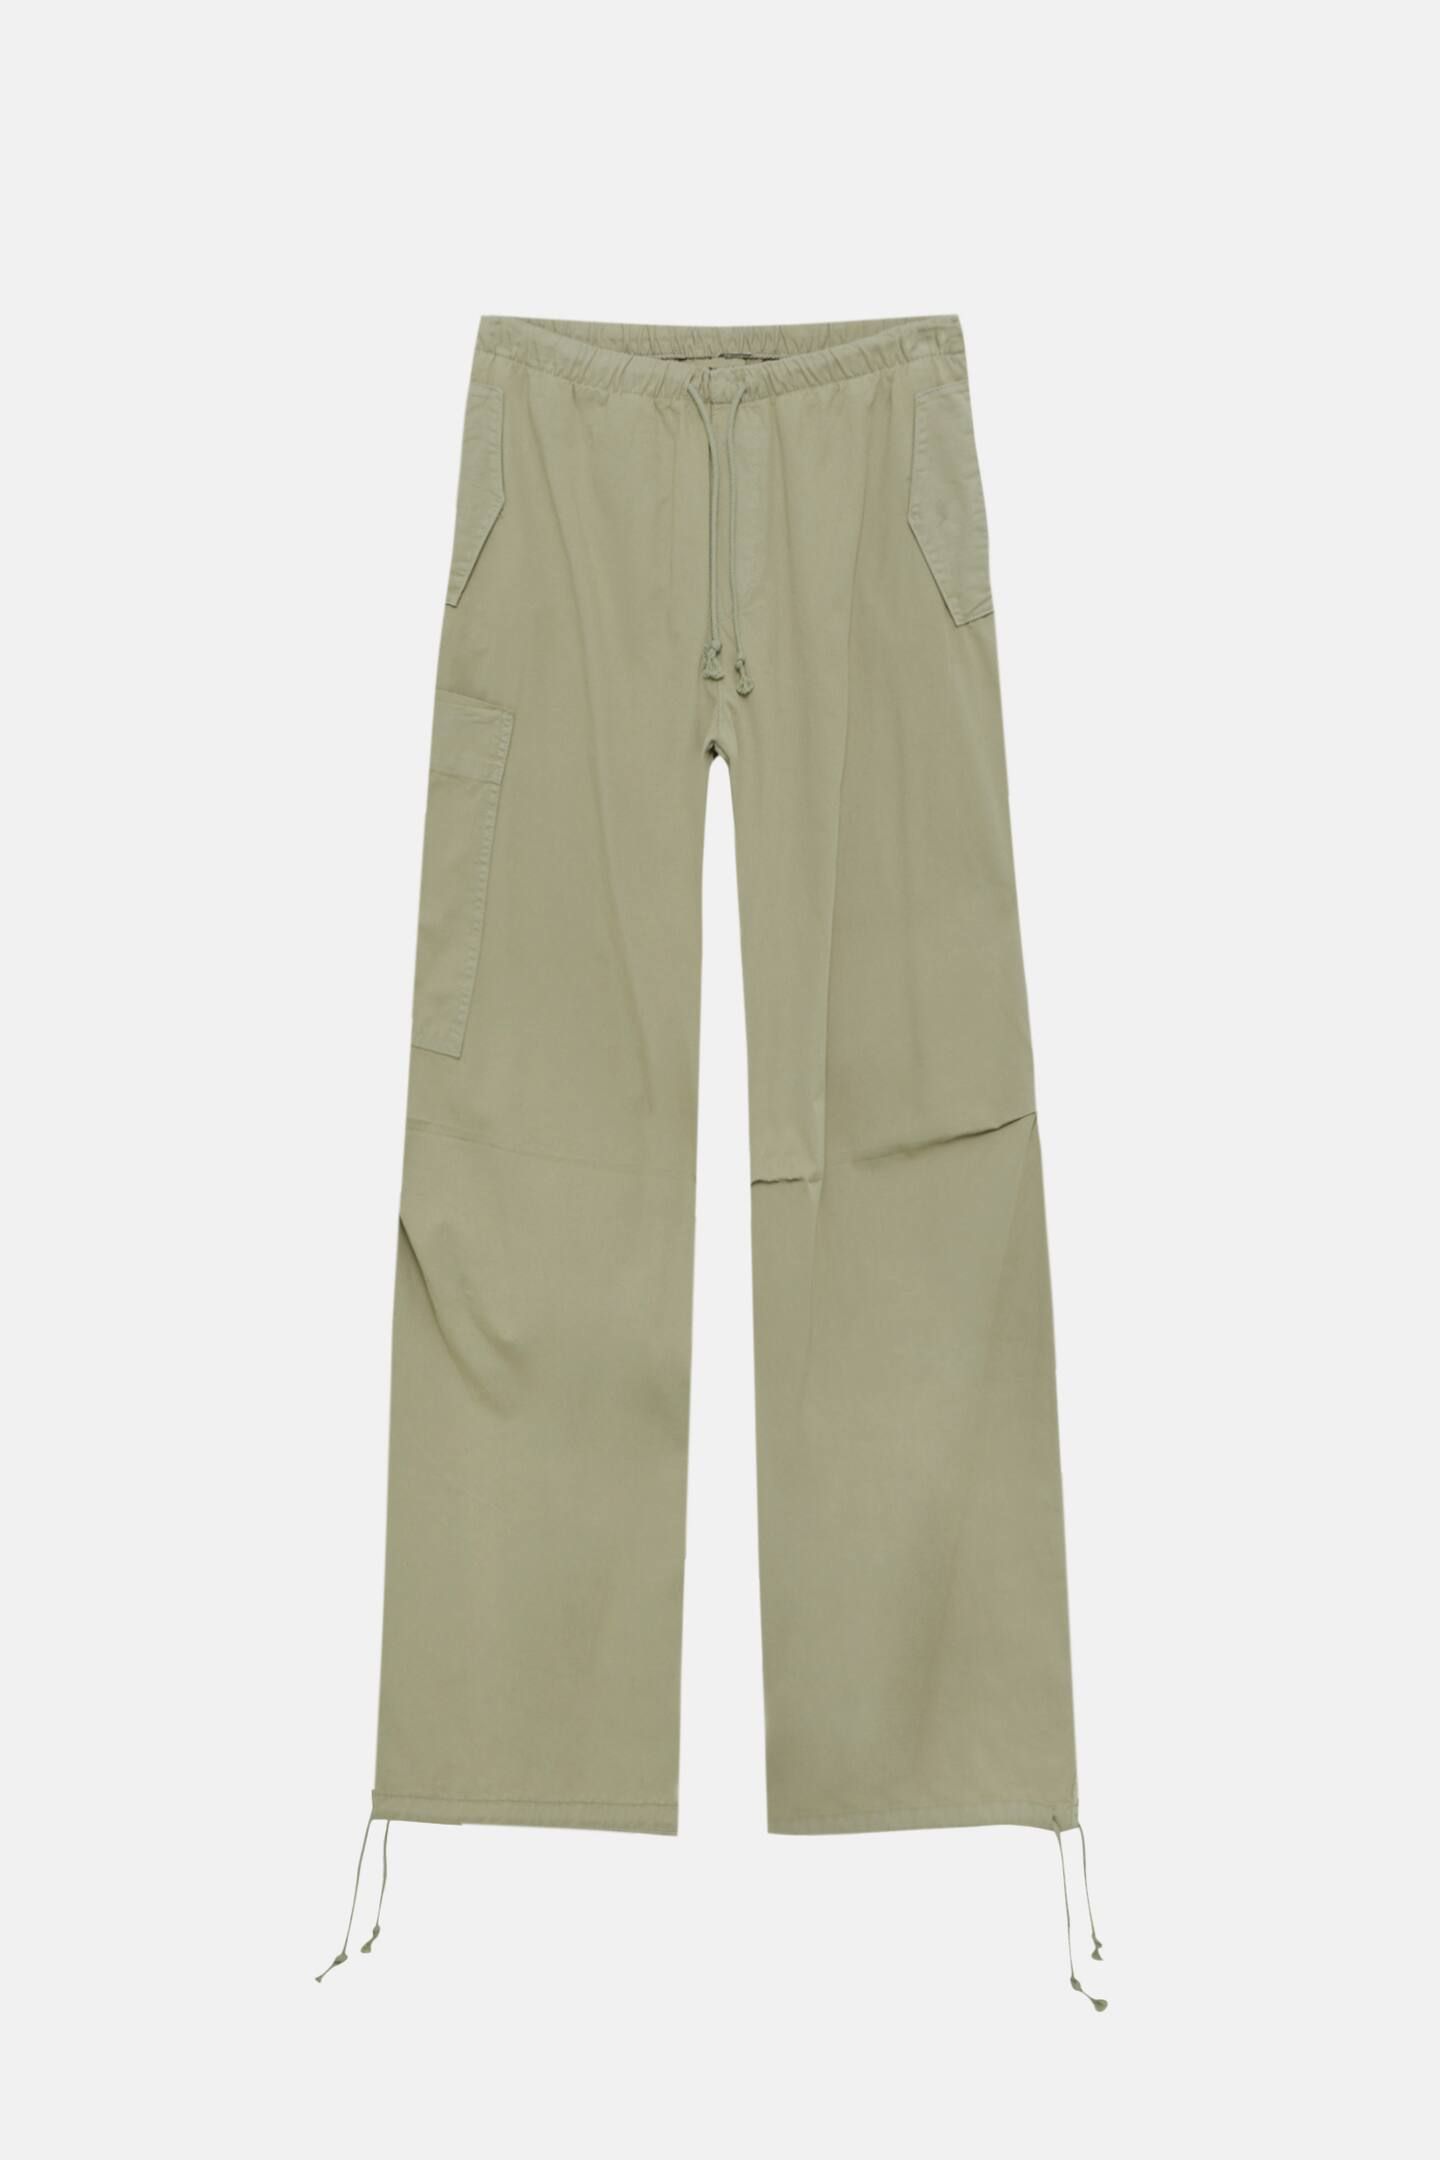 Parachute trousers with a pocket | PULL and BEAR UK